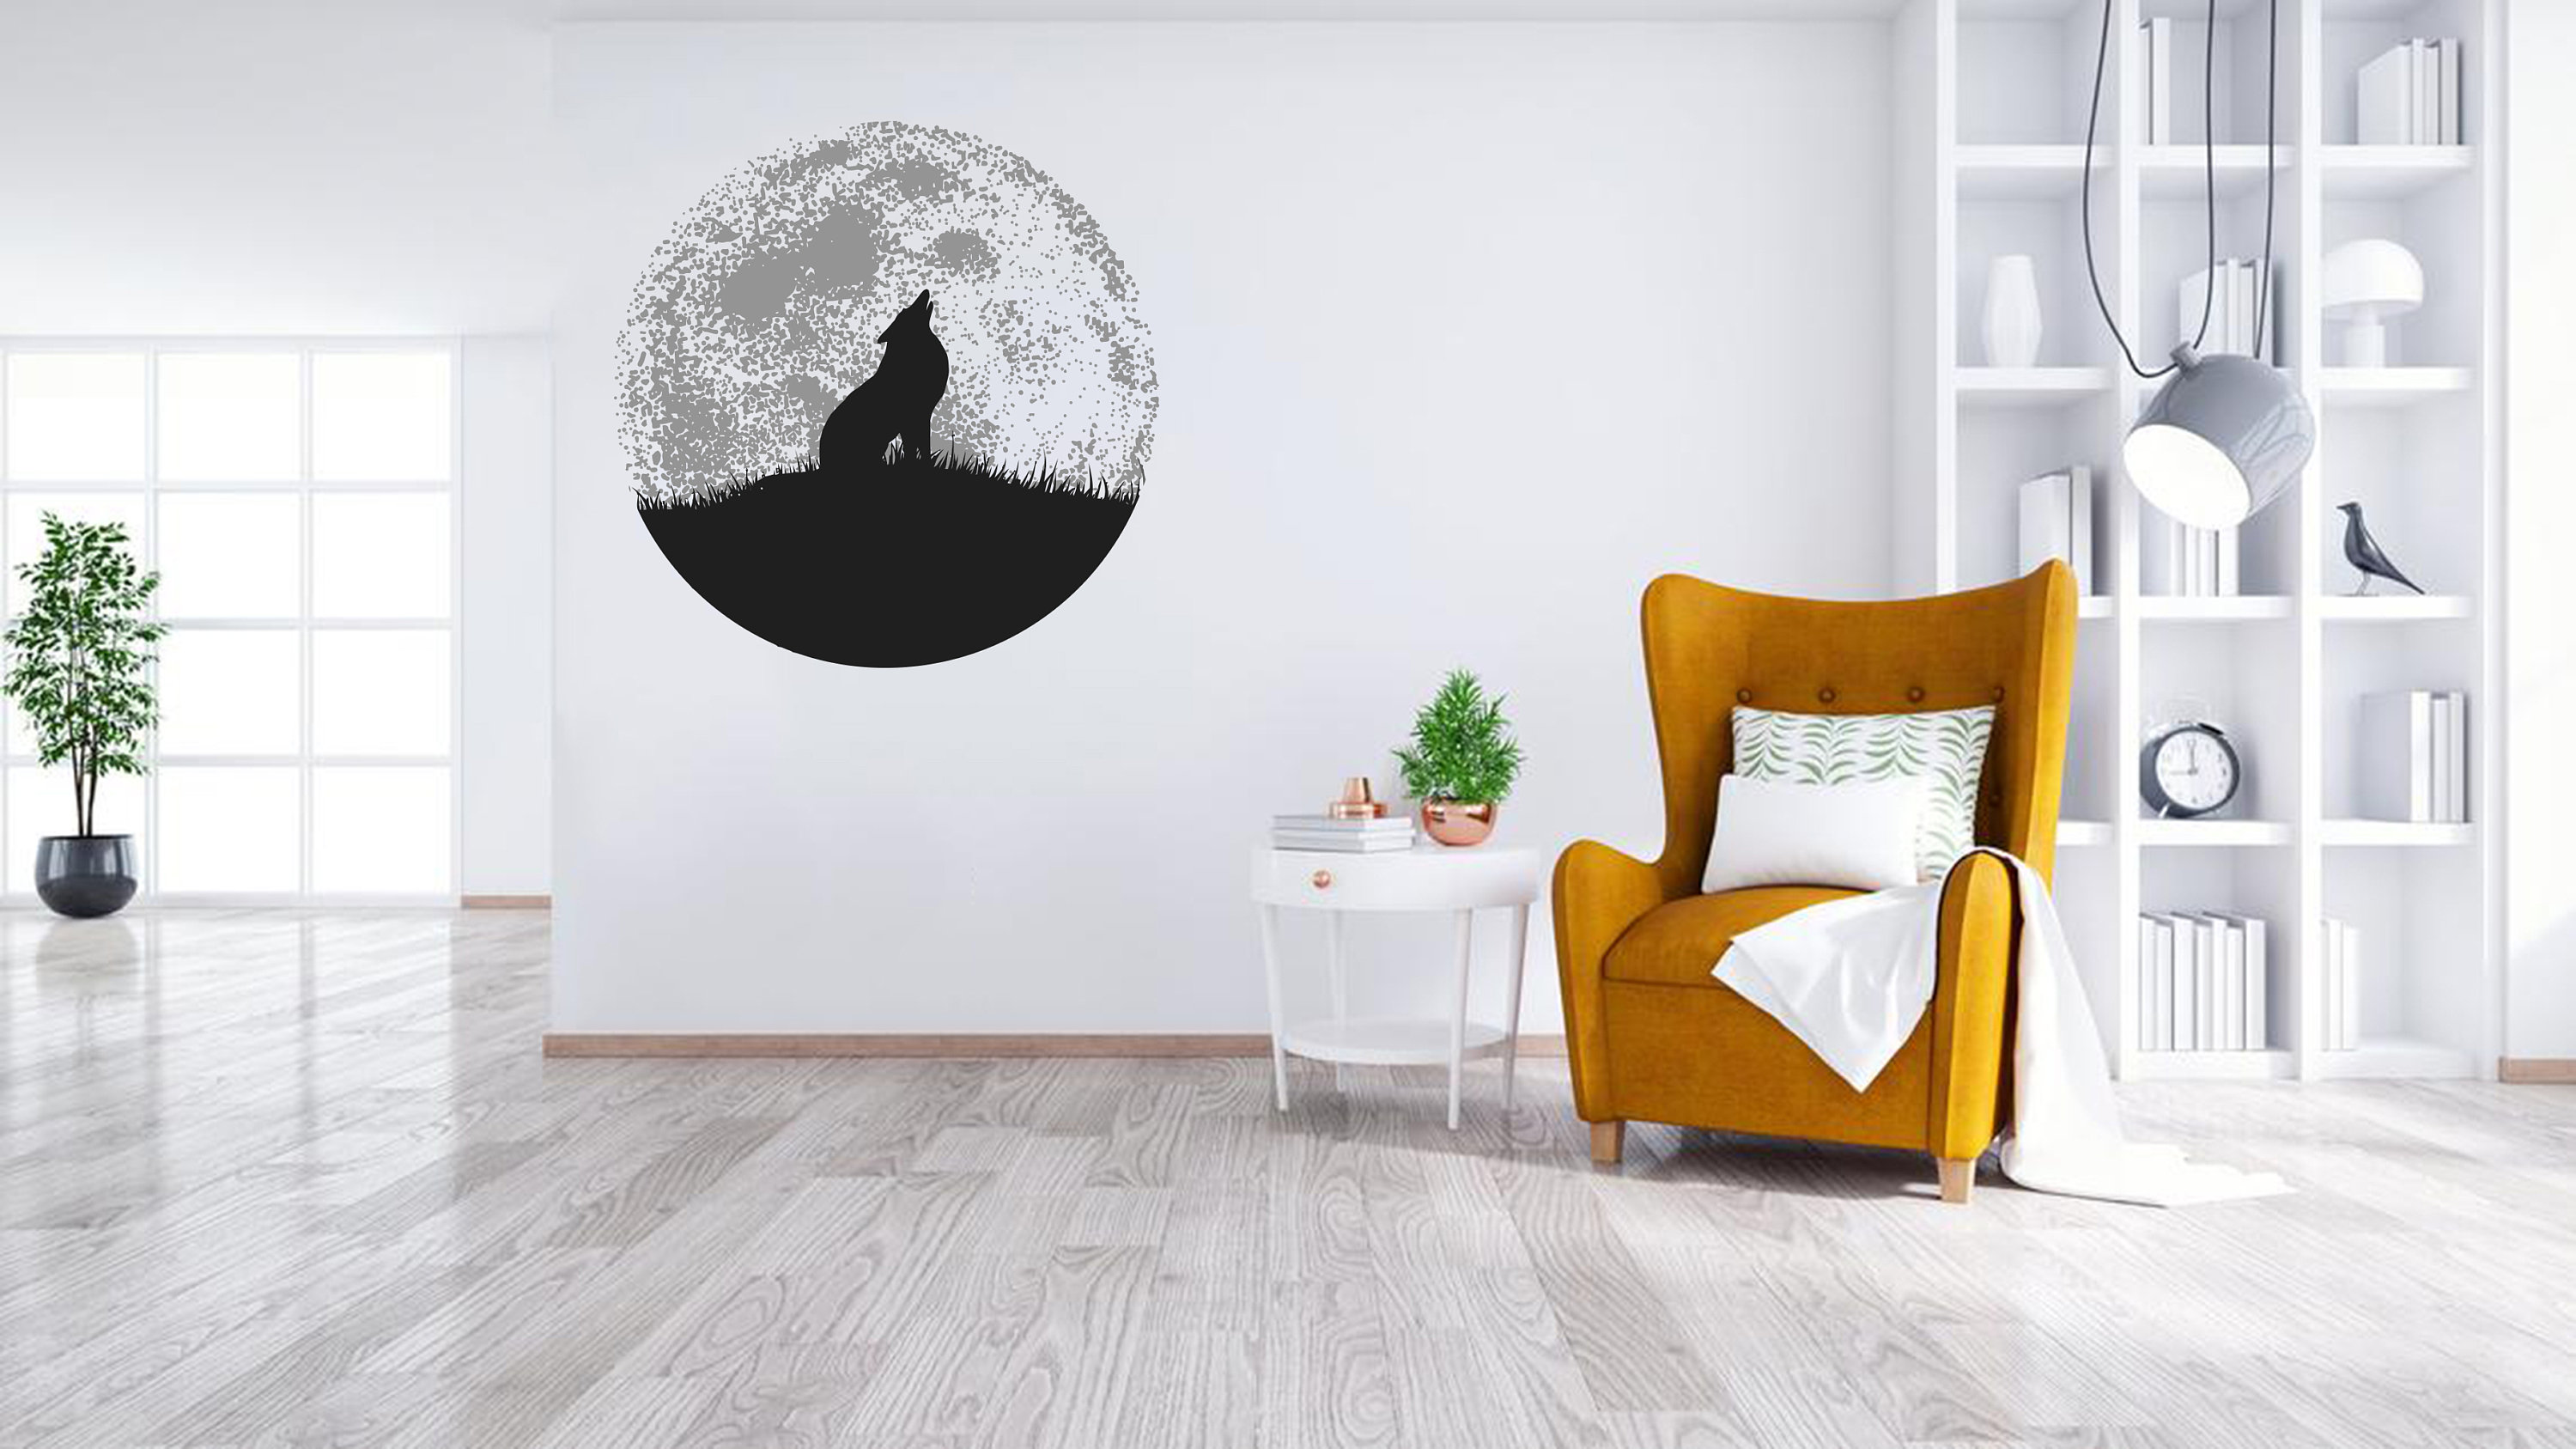 Wall Decal Wolf Moon Sticker Decor Art Room Howling Home Animal Free Shipping